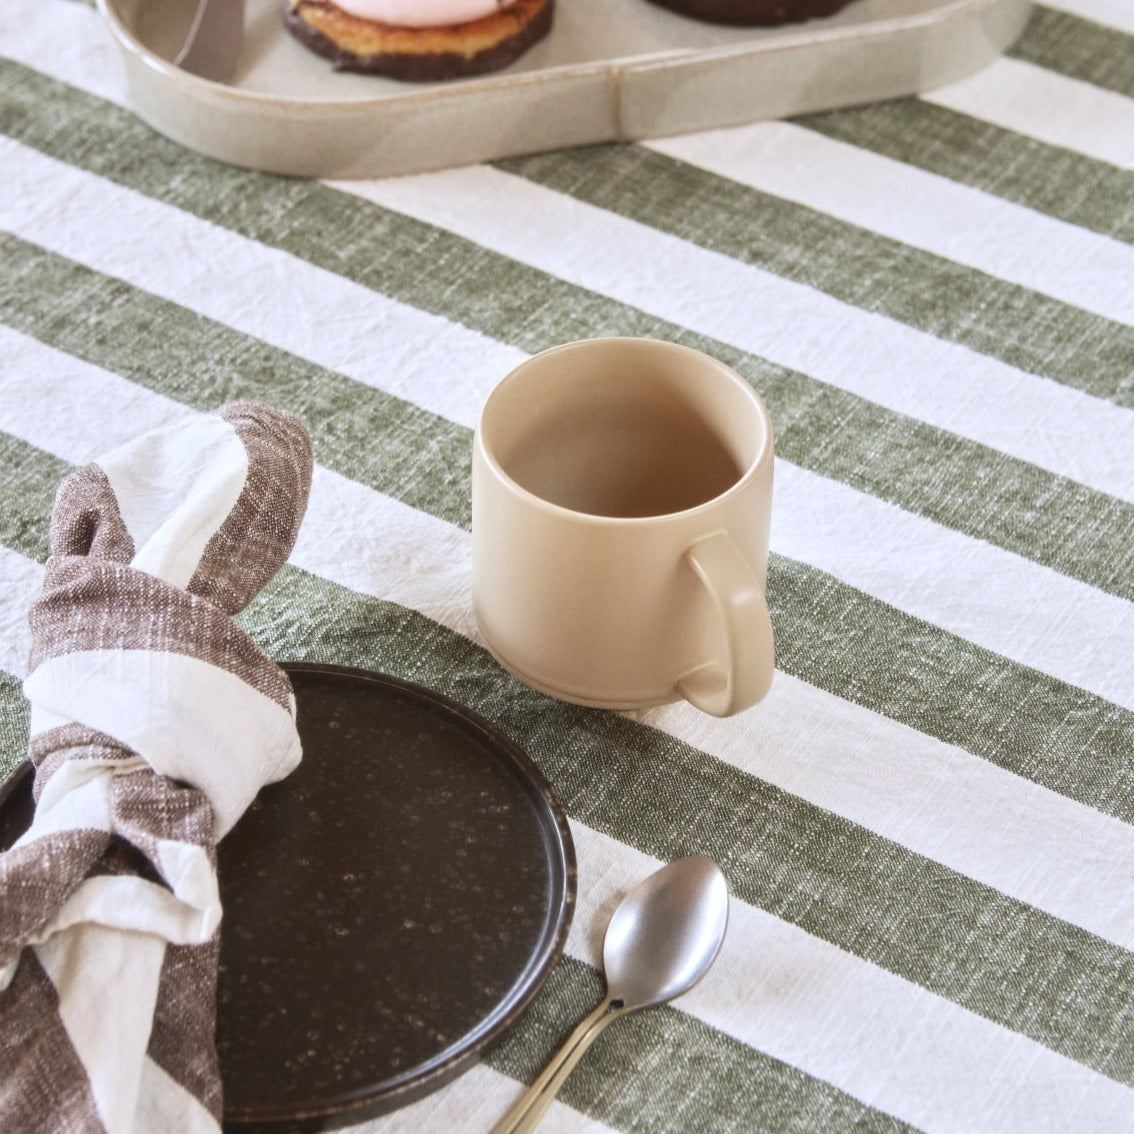 Striped Tablecloth - Olive